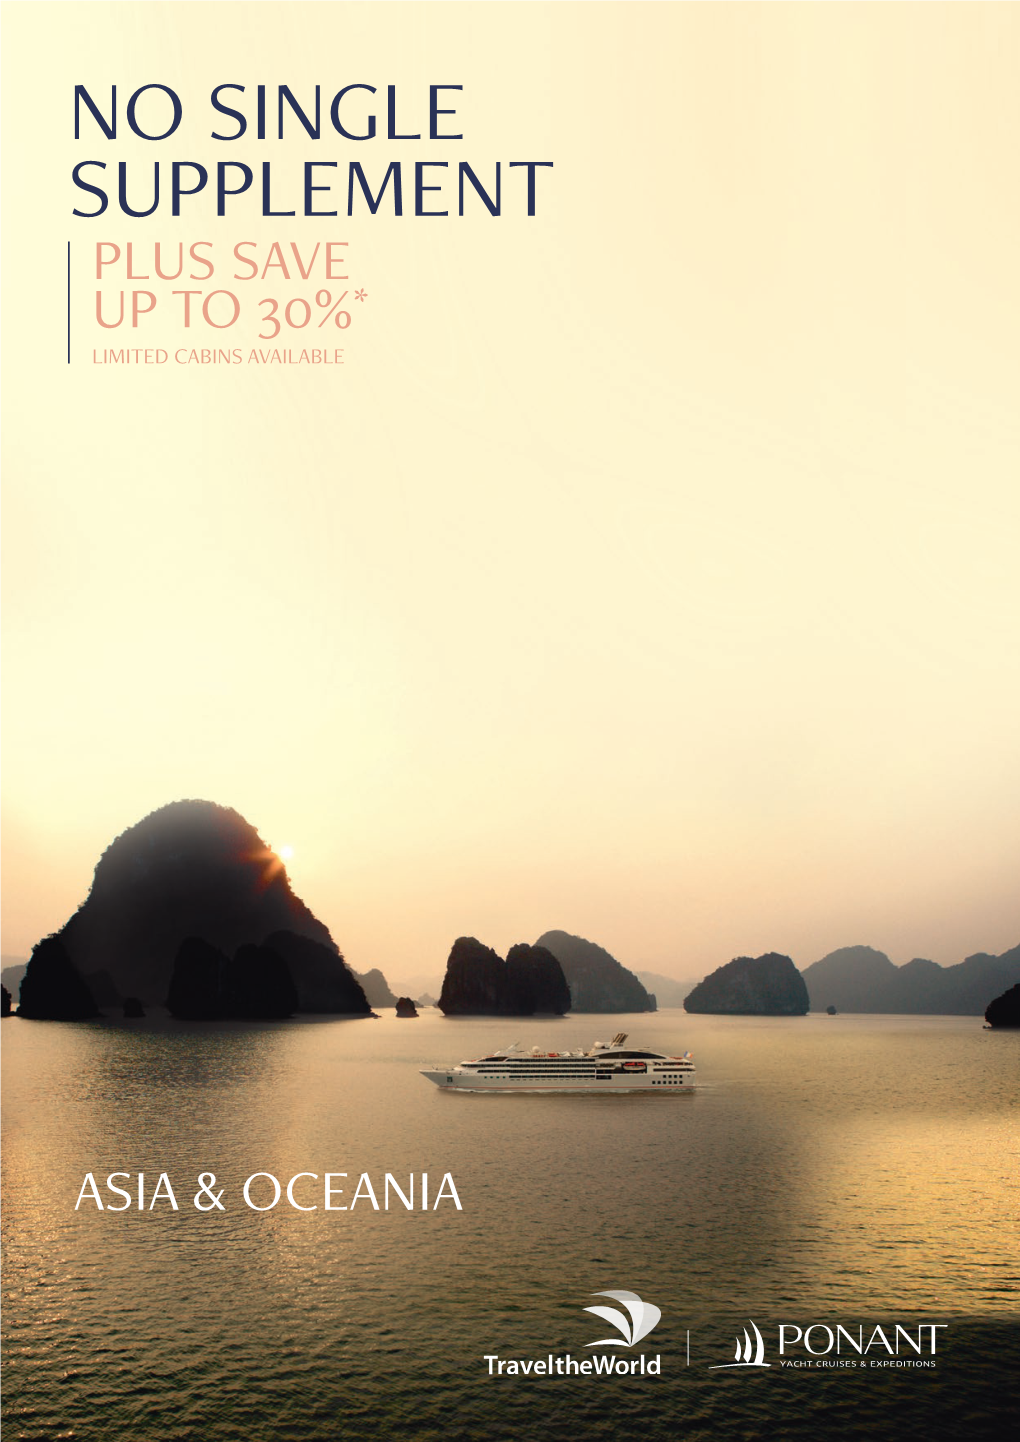 No Single Supplement Plus Save up to 30%* Limited Cabins Available